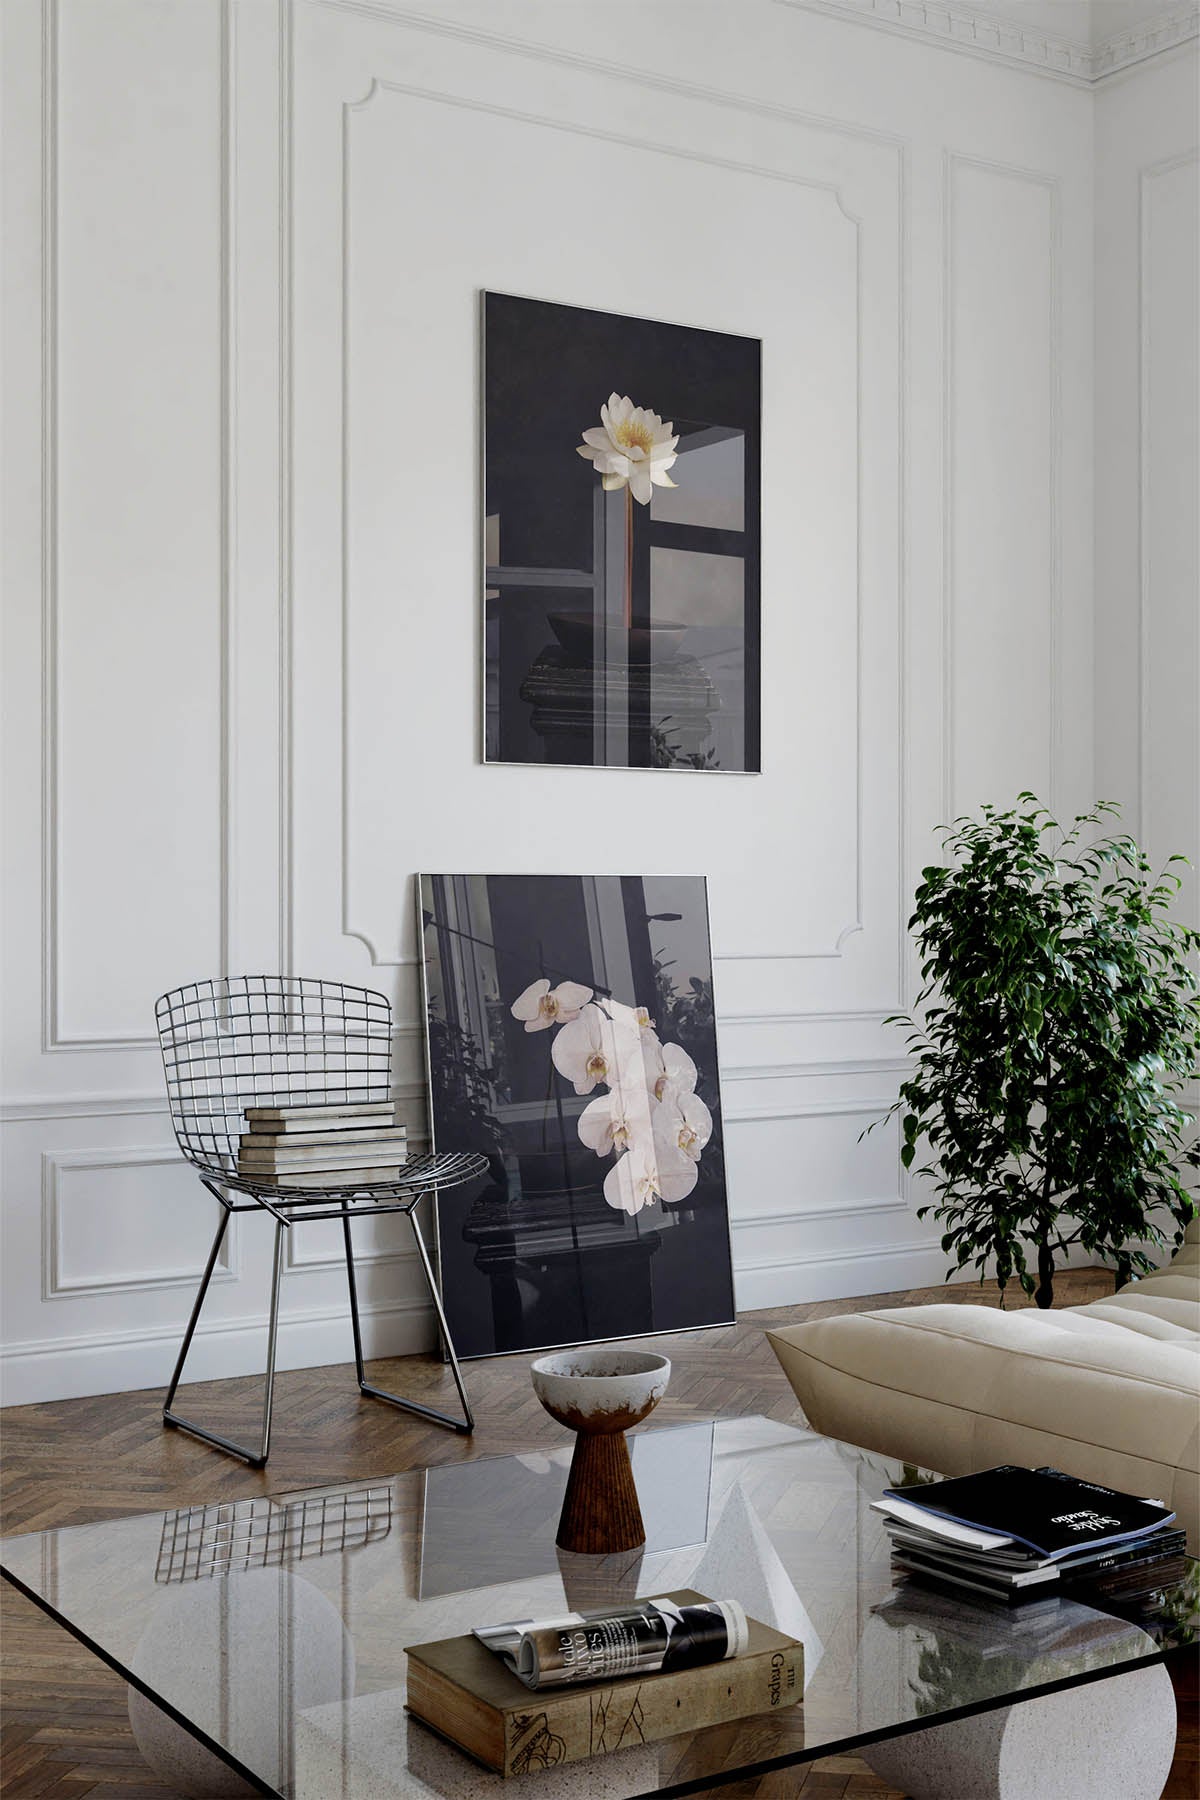 Fine Art Print Of A White Phaleanopsis Stem In A Black Bowl On A Black Mantle In A Living Room With A Bertoia Chair.